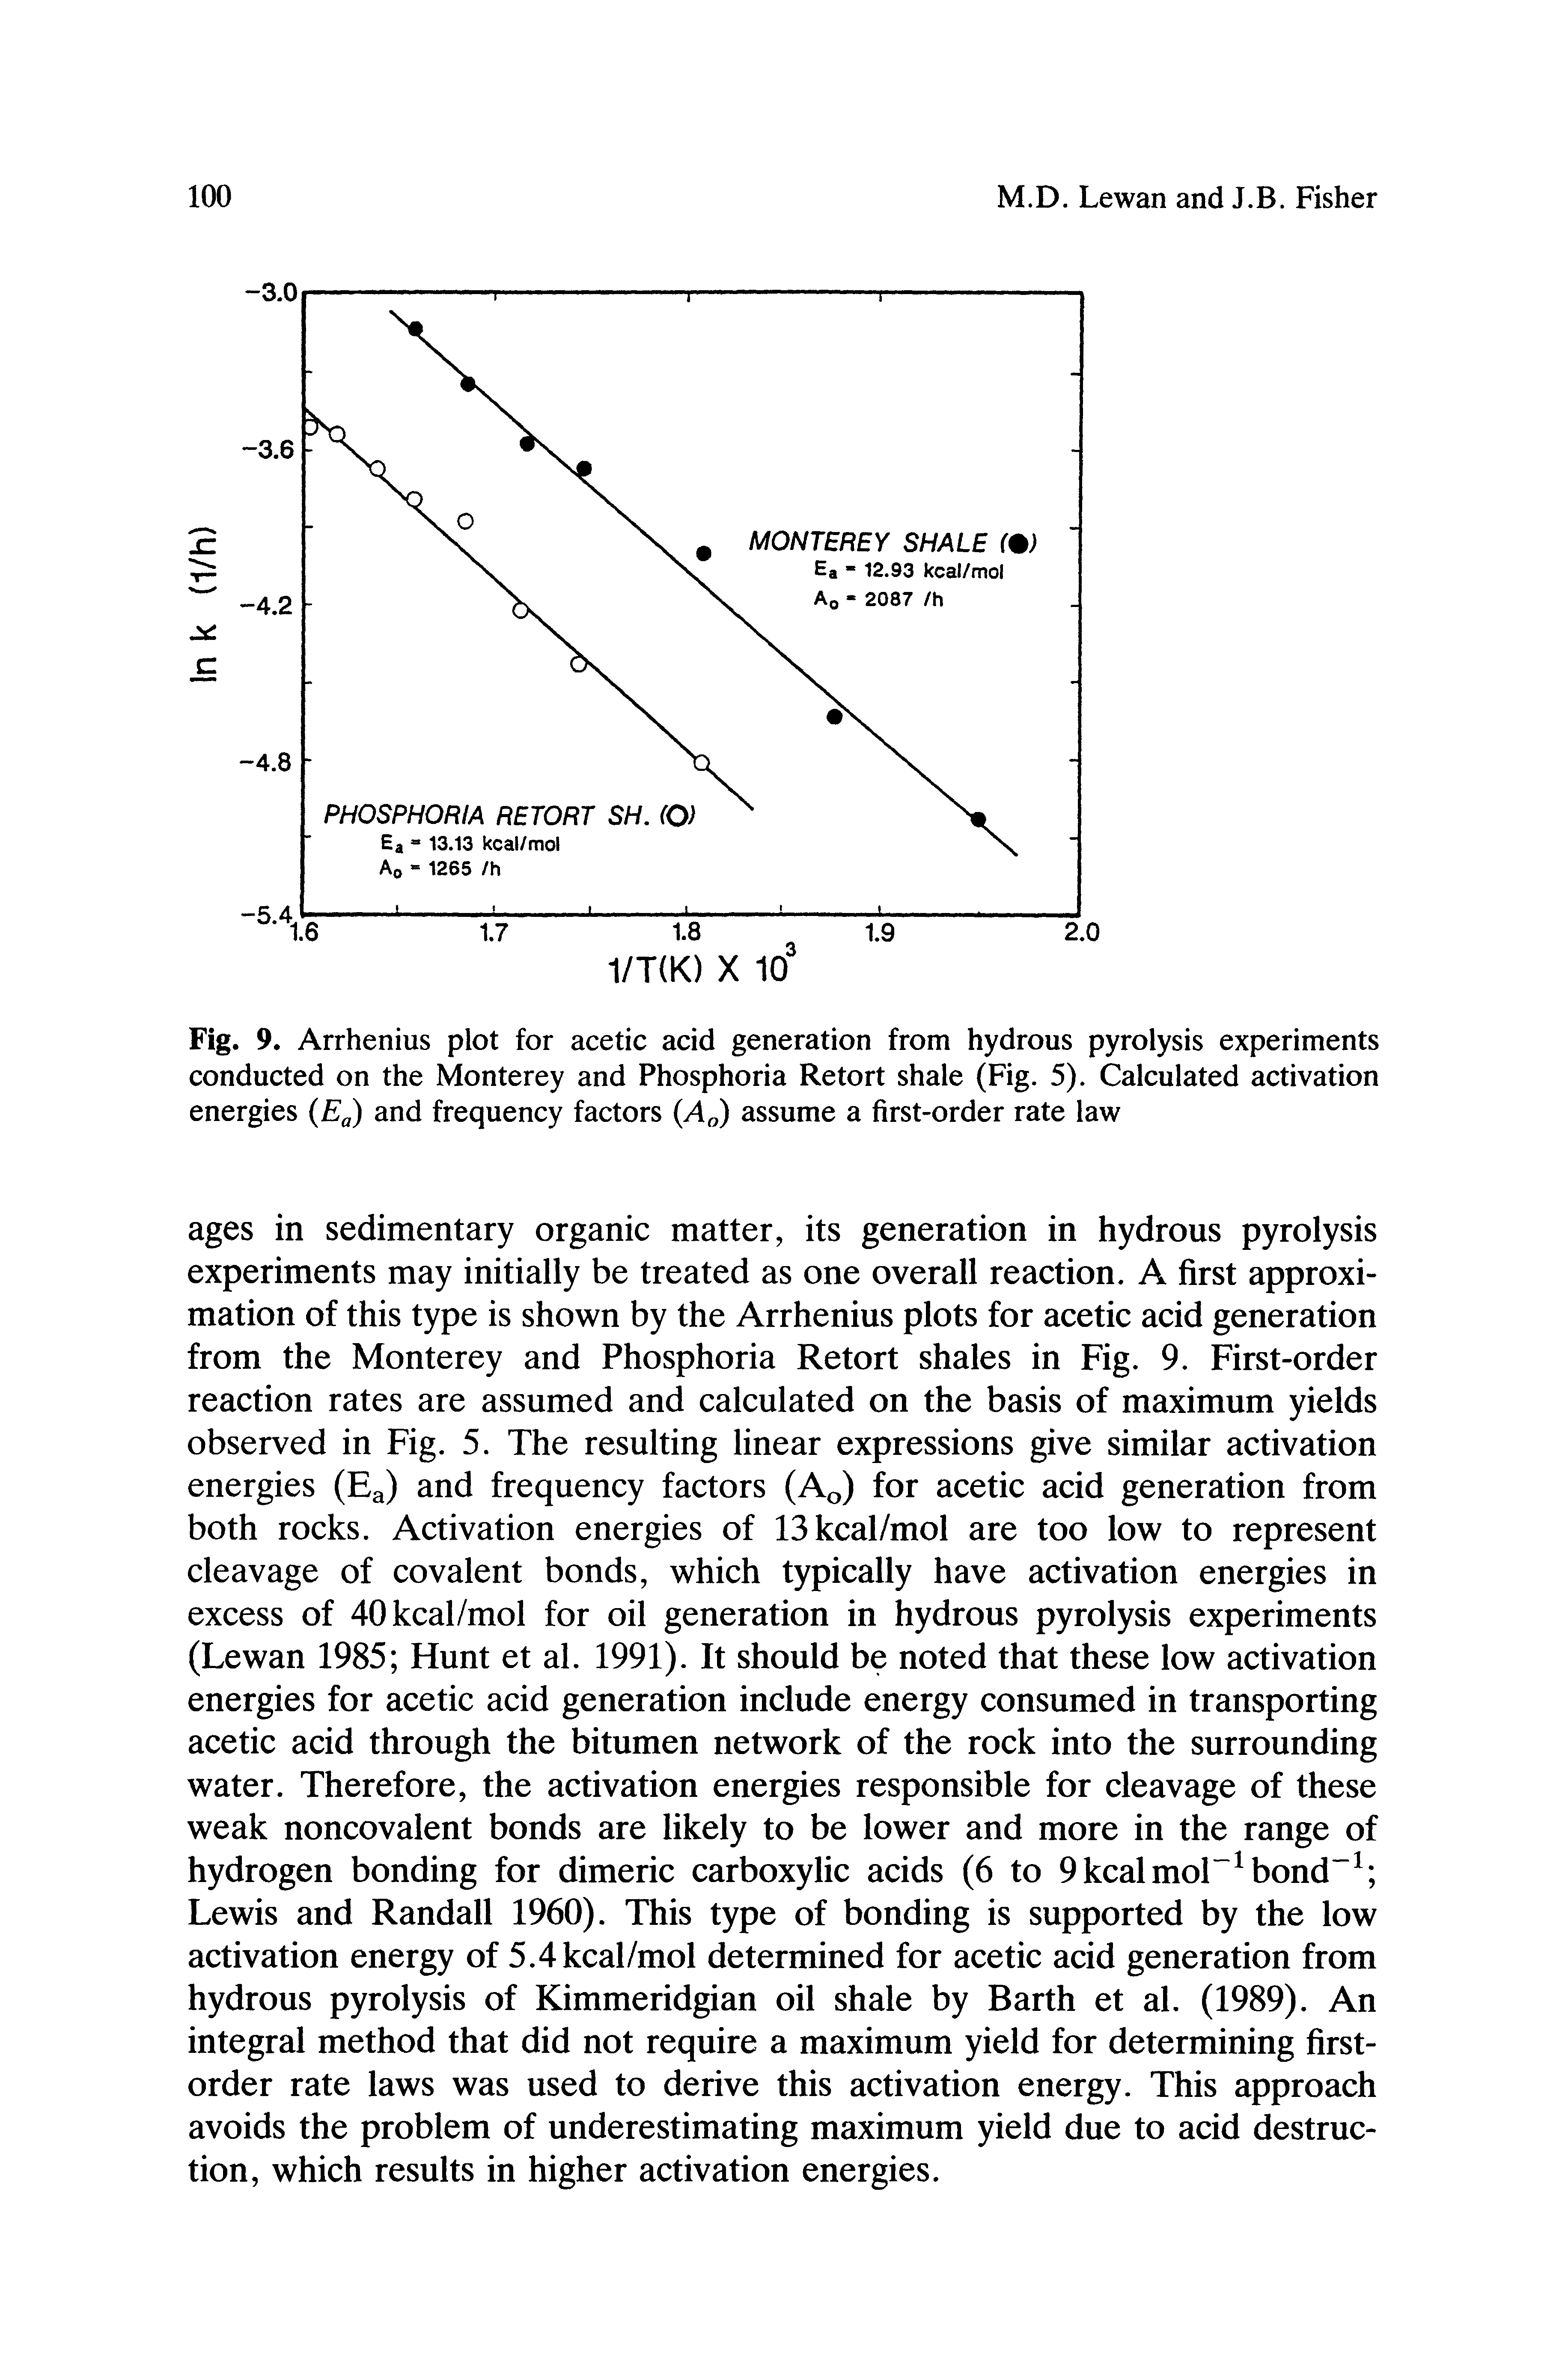 Fig. 9. Arrhenius plot for acetic acid generation from hydrous pyrolysis experiments conducted on the Monterey and Phosphoria Retort shale (Fig. 5). Calculated activation energies ) and frequency factors A ) assume a first-order rate law...